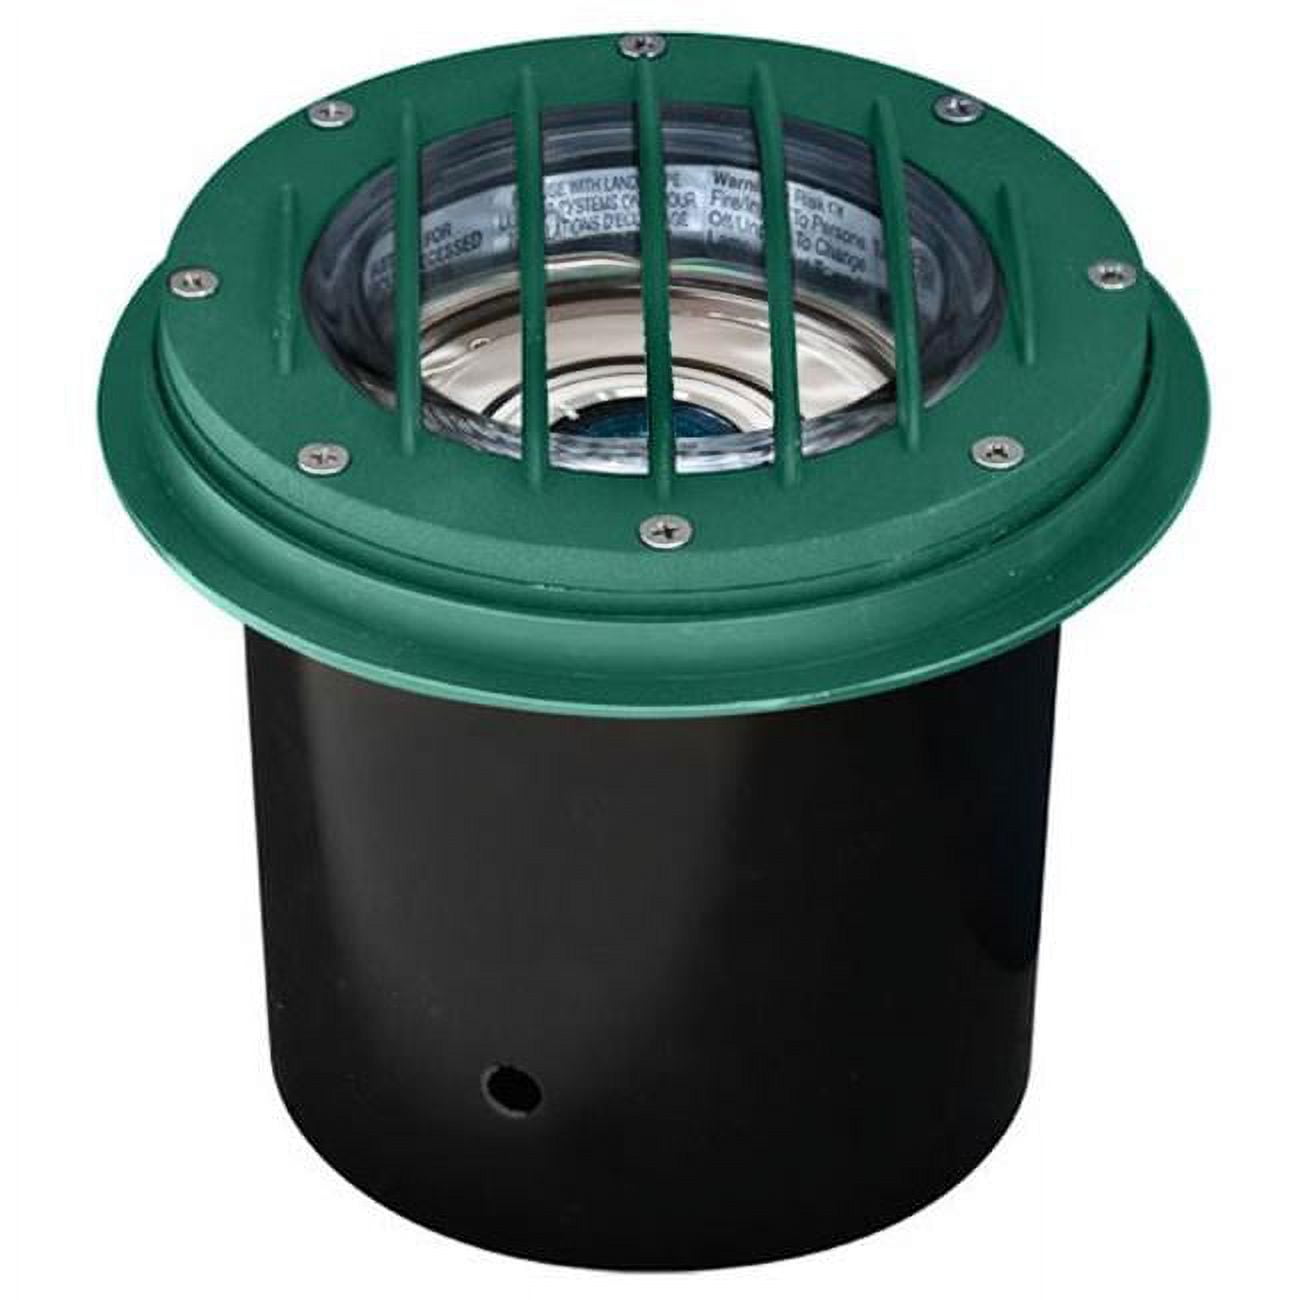 Wall Light With Grill Adjustable 7w Led - Mr16 12v, Green